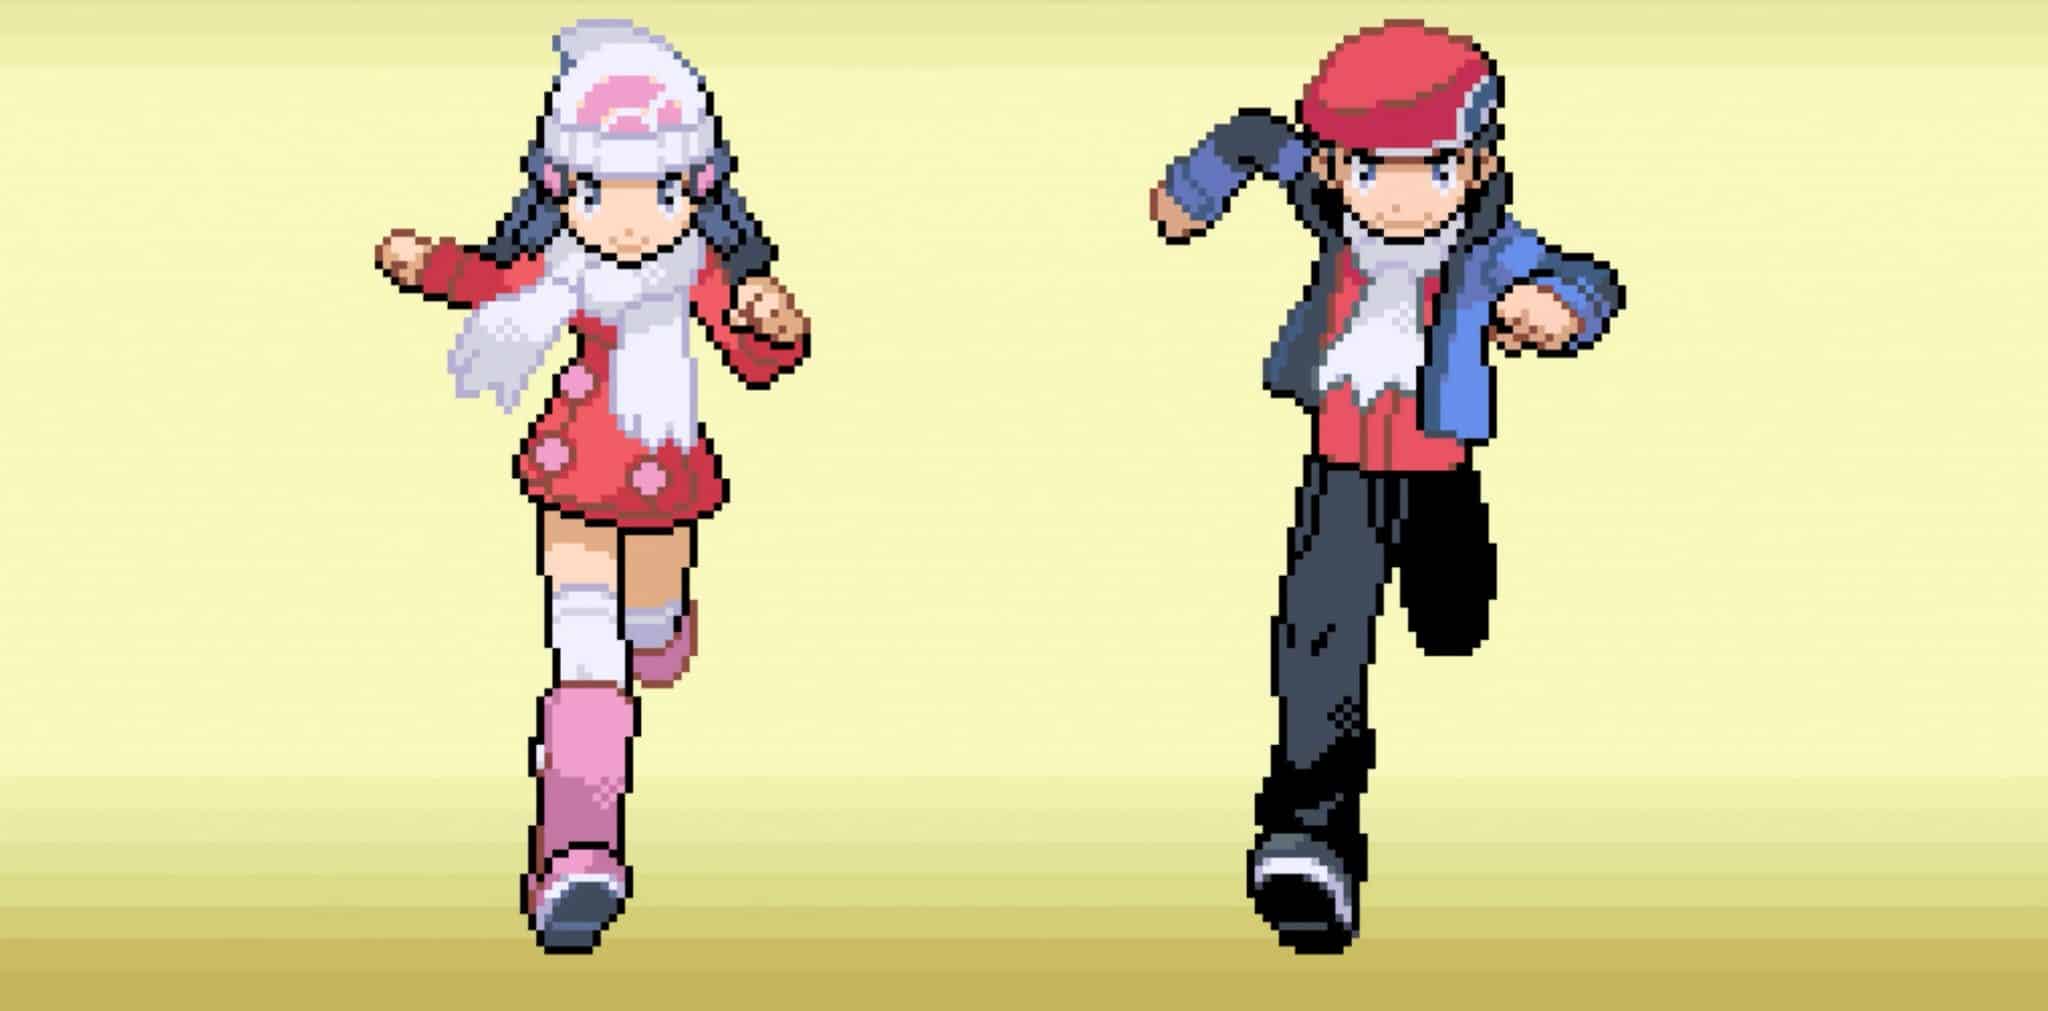 How to get Pokemon Platinum outfits in Pokemon Diamond & Pearl